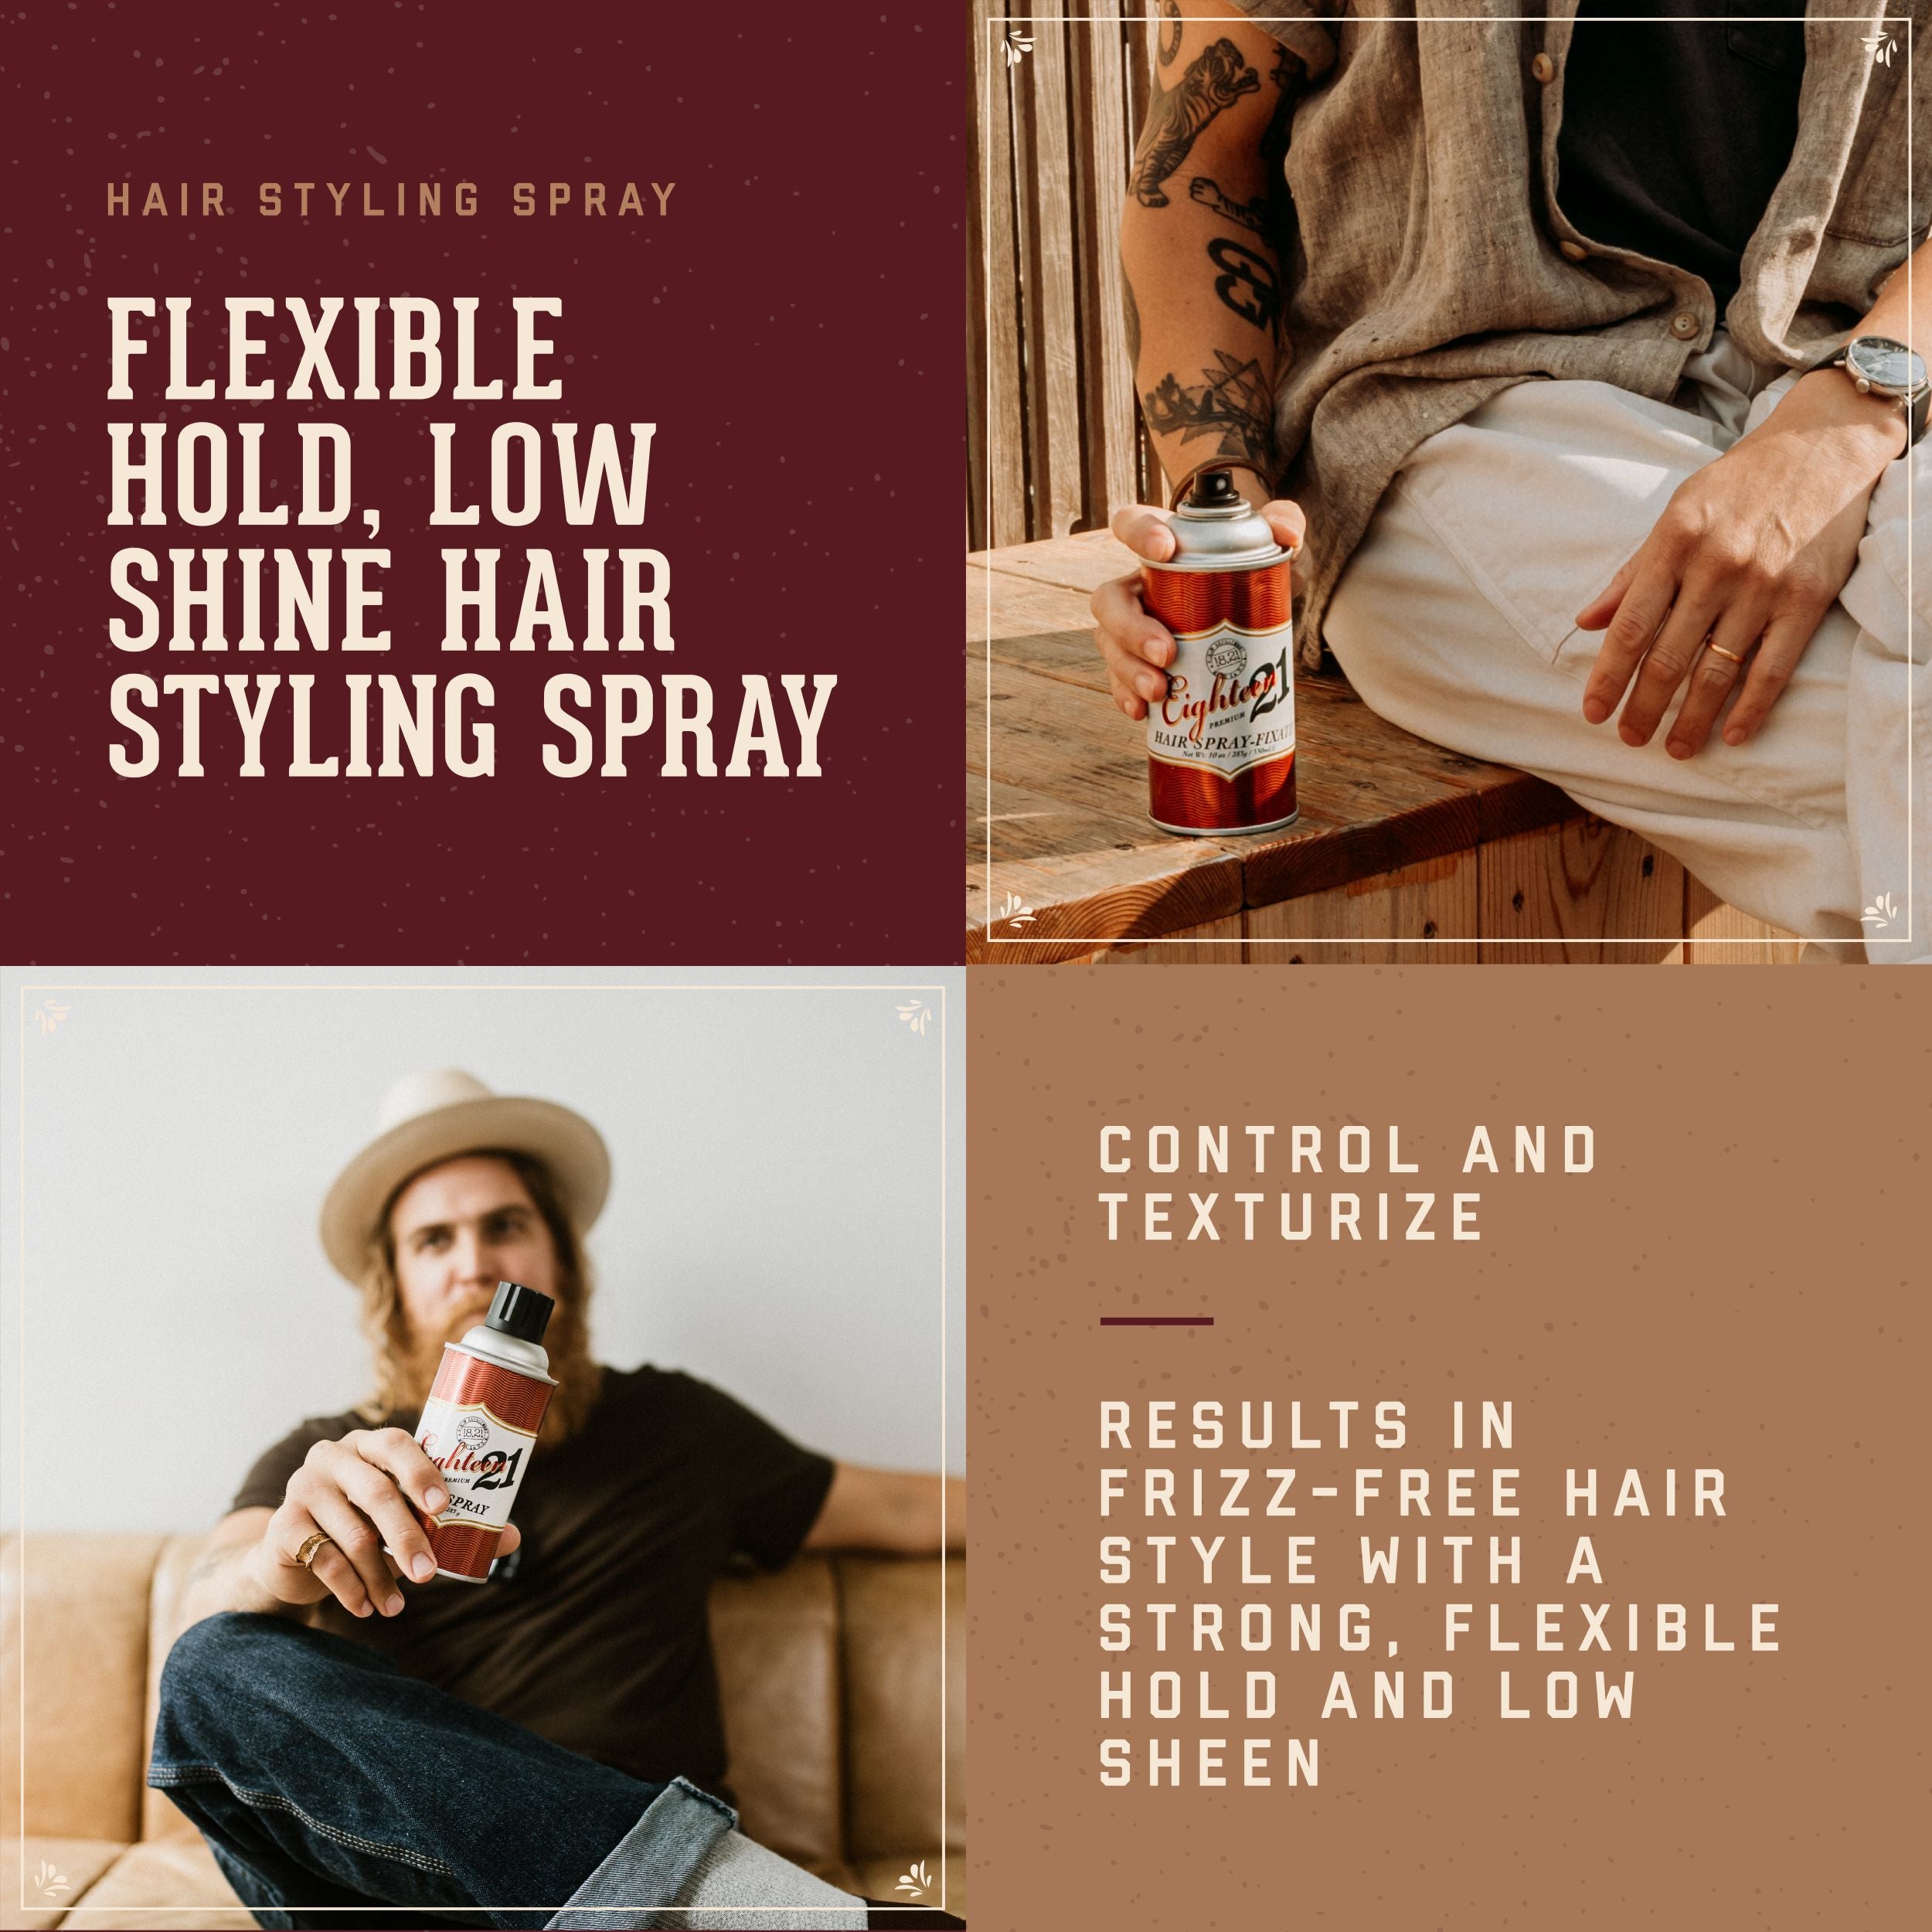 Flexible hold, low shine hair, styling spray.  Control and texturize. Results in frizz-free hair style with a strong flexble hold and low sheen.